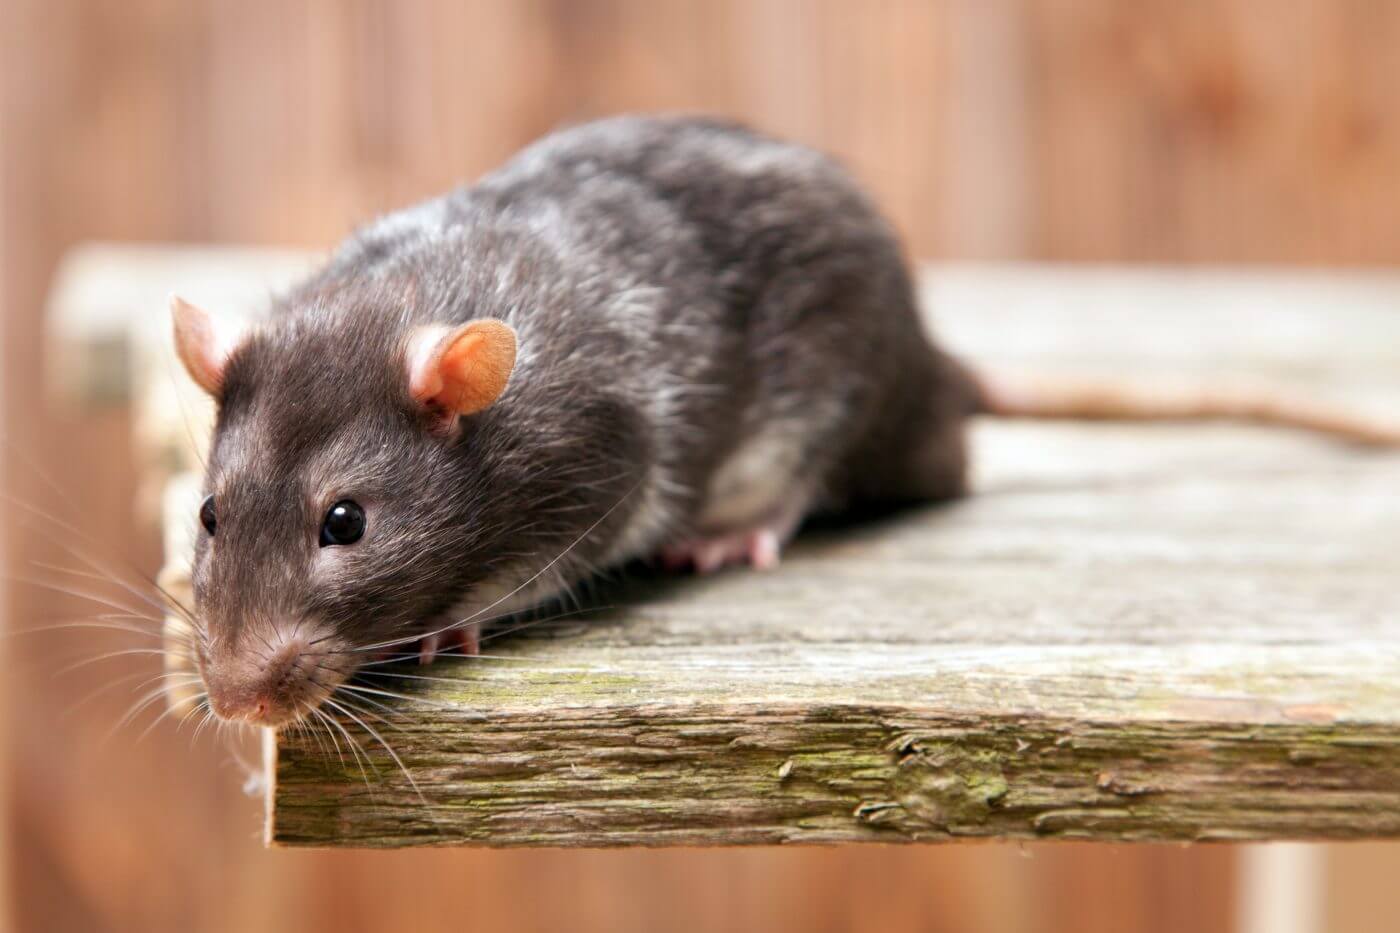 How to Get Rid of Rats in Your Home